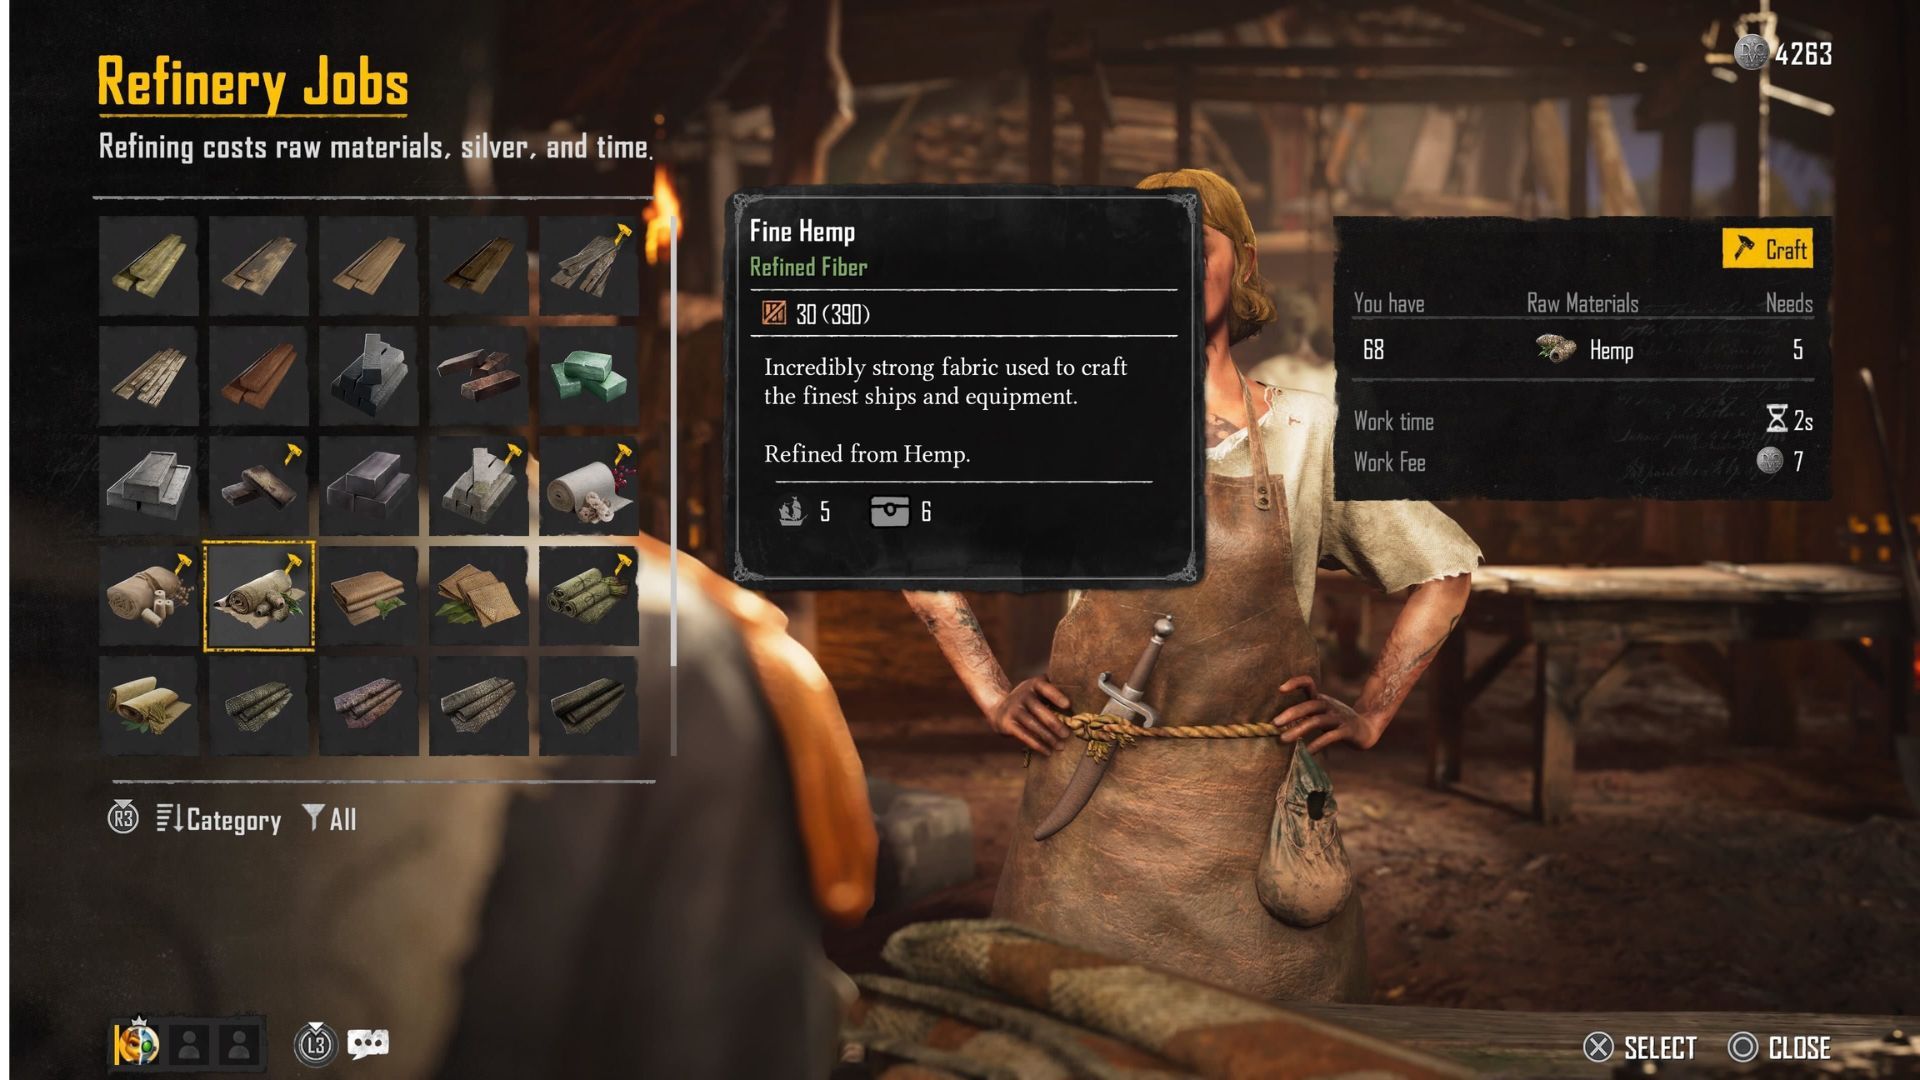 The Refinery vendor in Skull and Bones with the Refined Hemp option highlighted